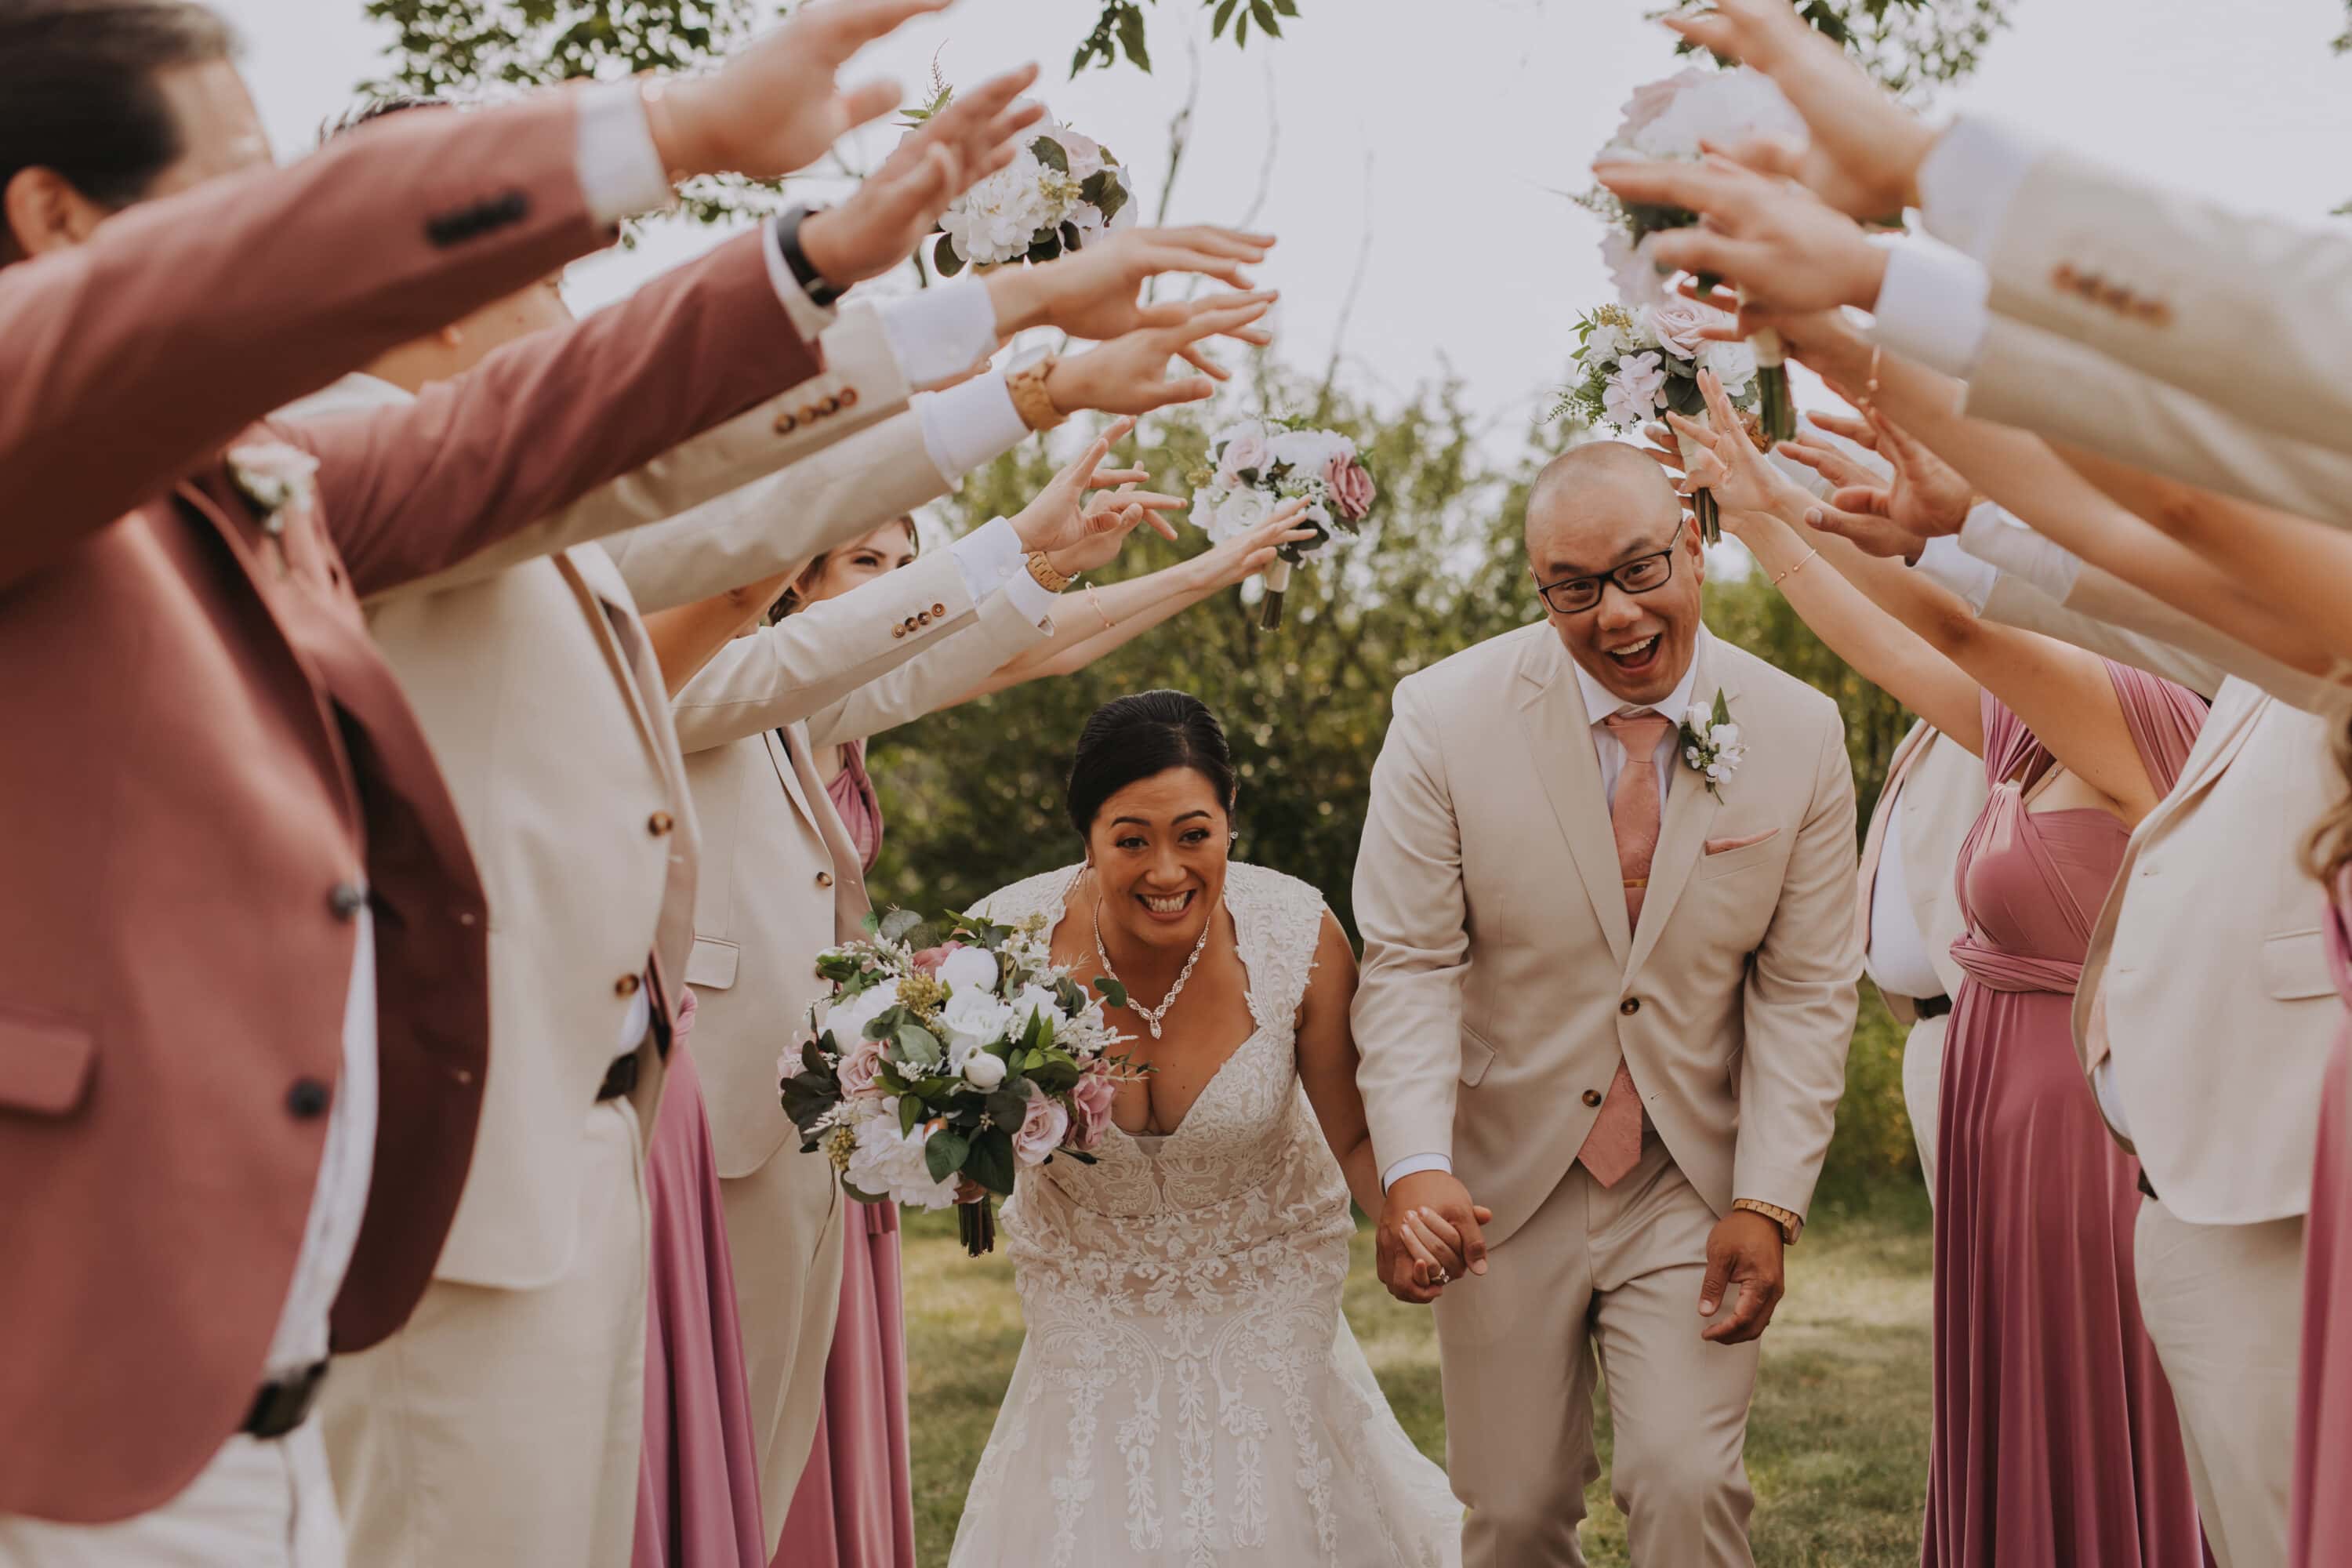 A wedding party is holding their arms up to create an arch, and the bride and groom are walking underneath